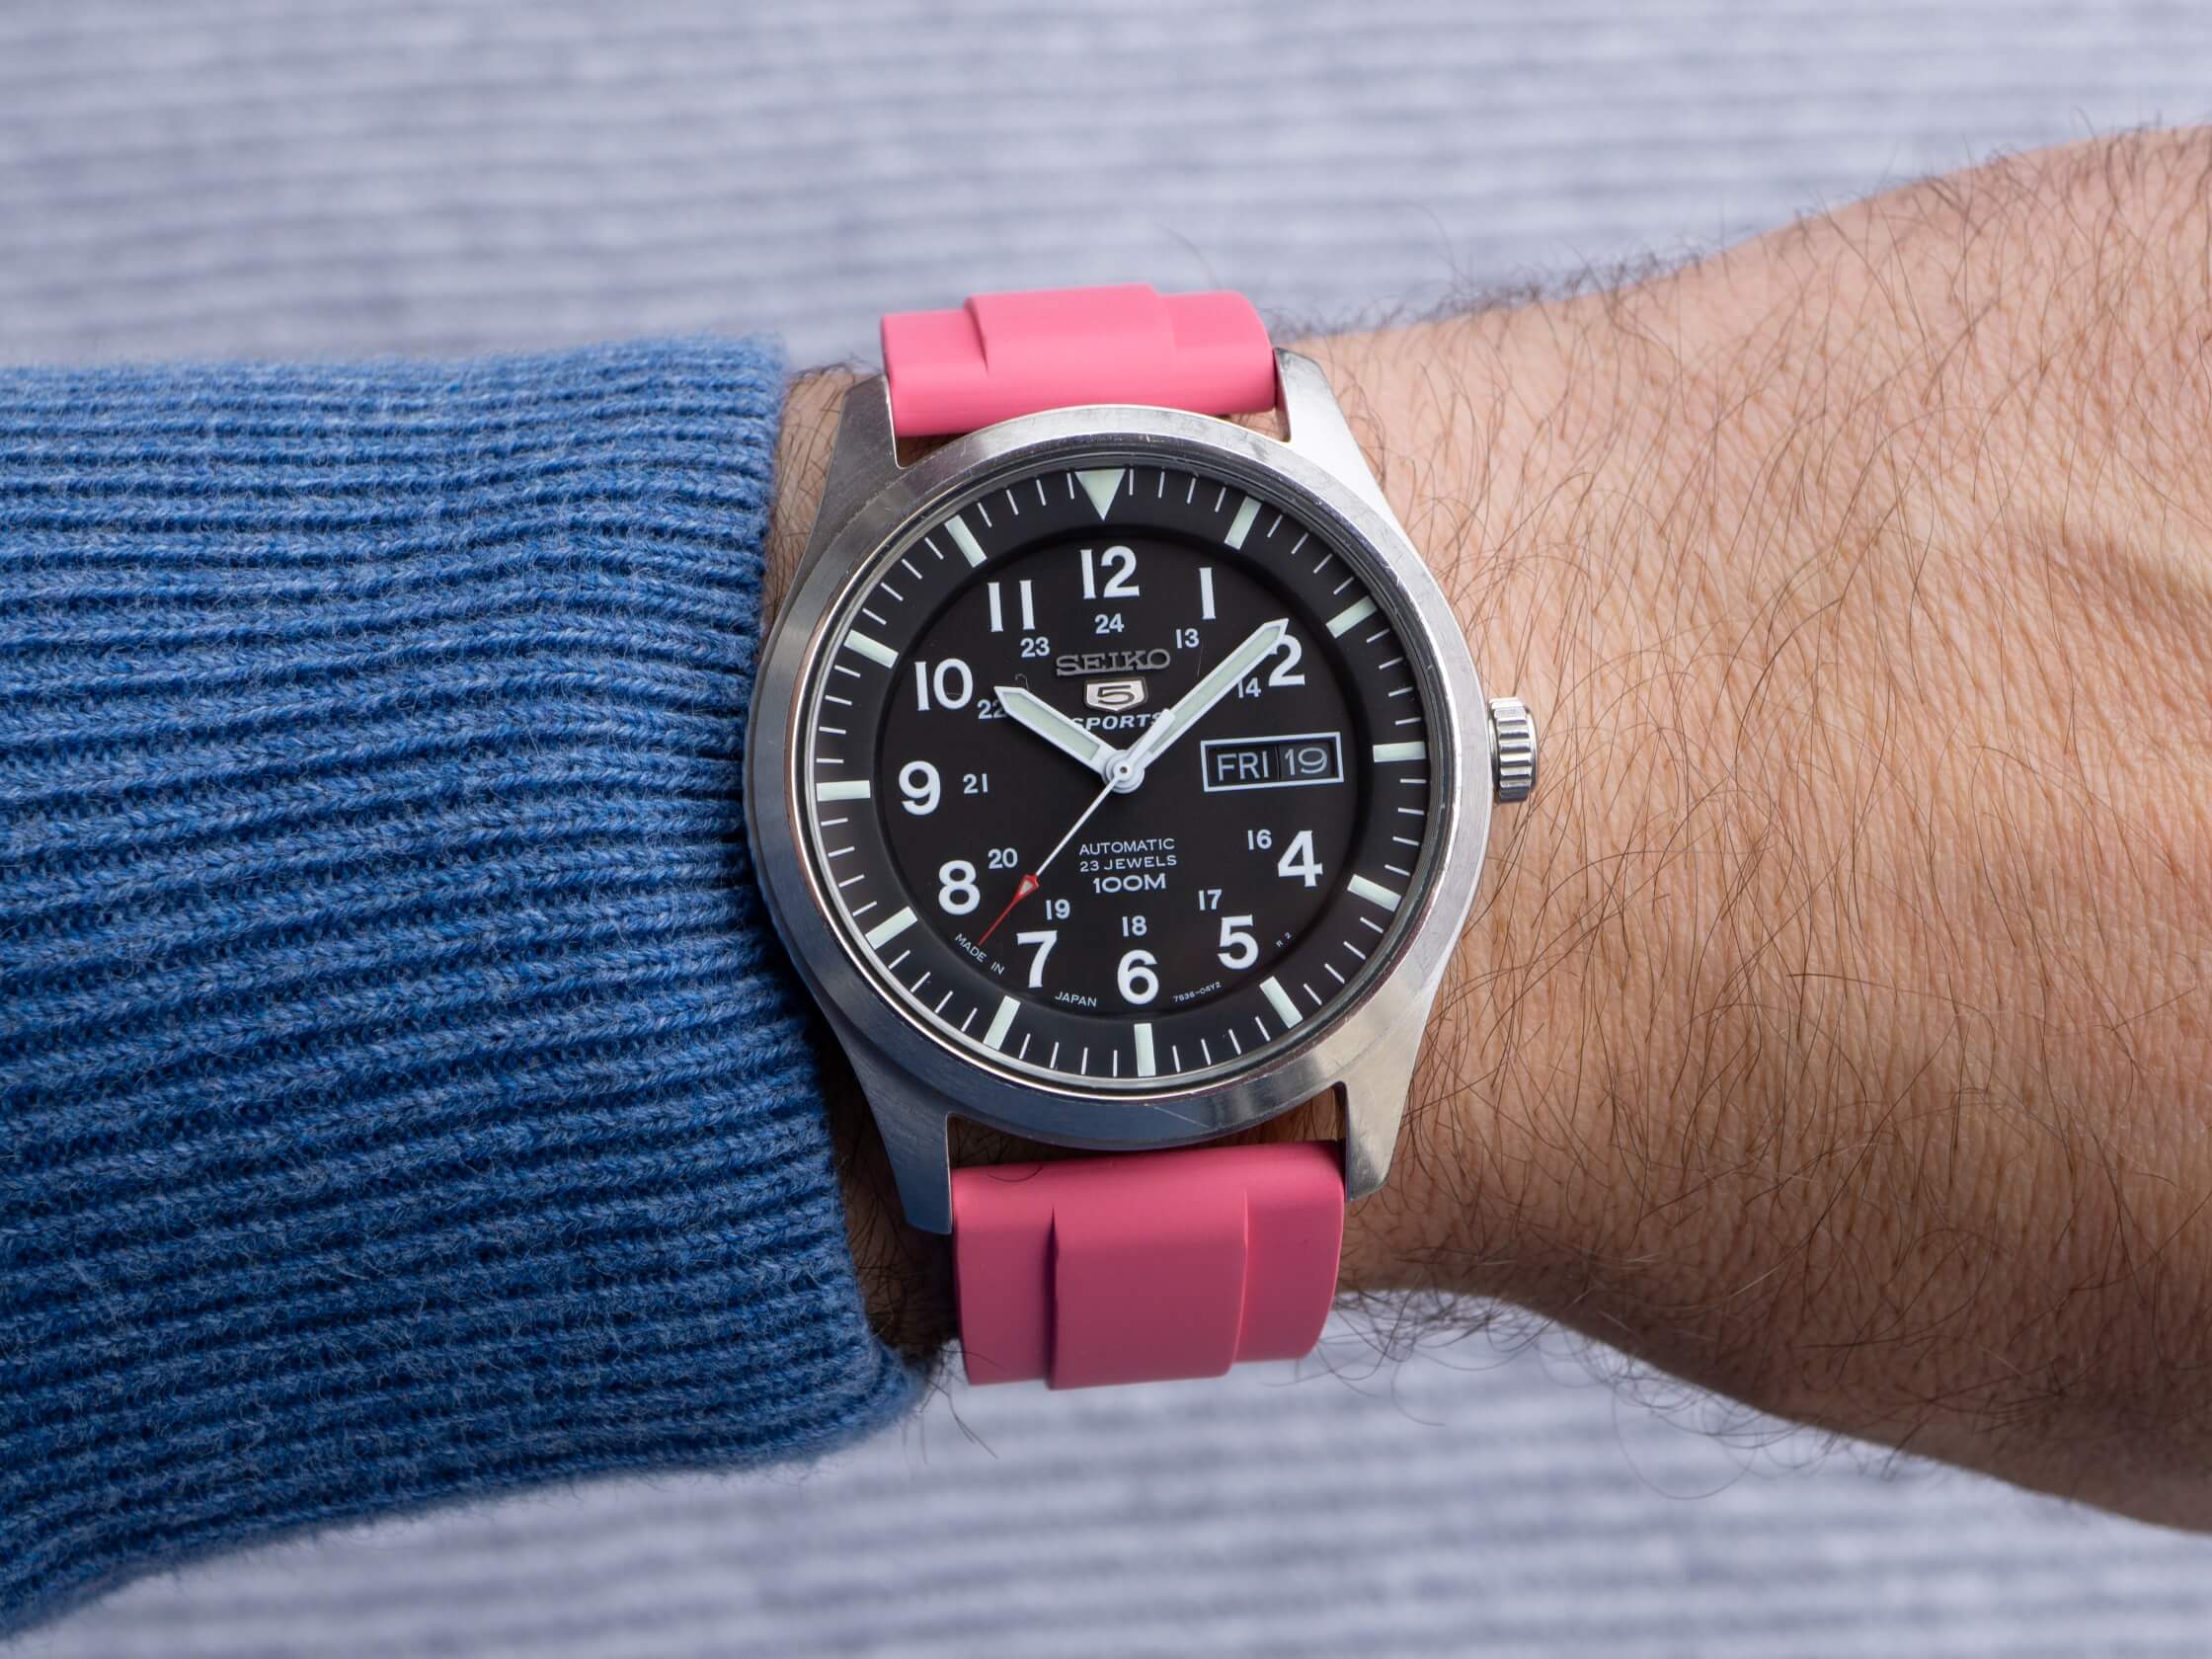 Pink FKM Rubber Strap by Brodinkee StrapHabit on a Seiko military watch